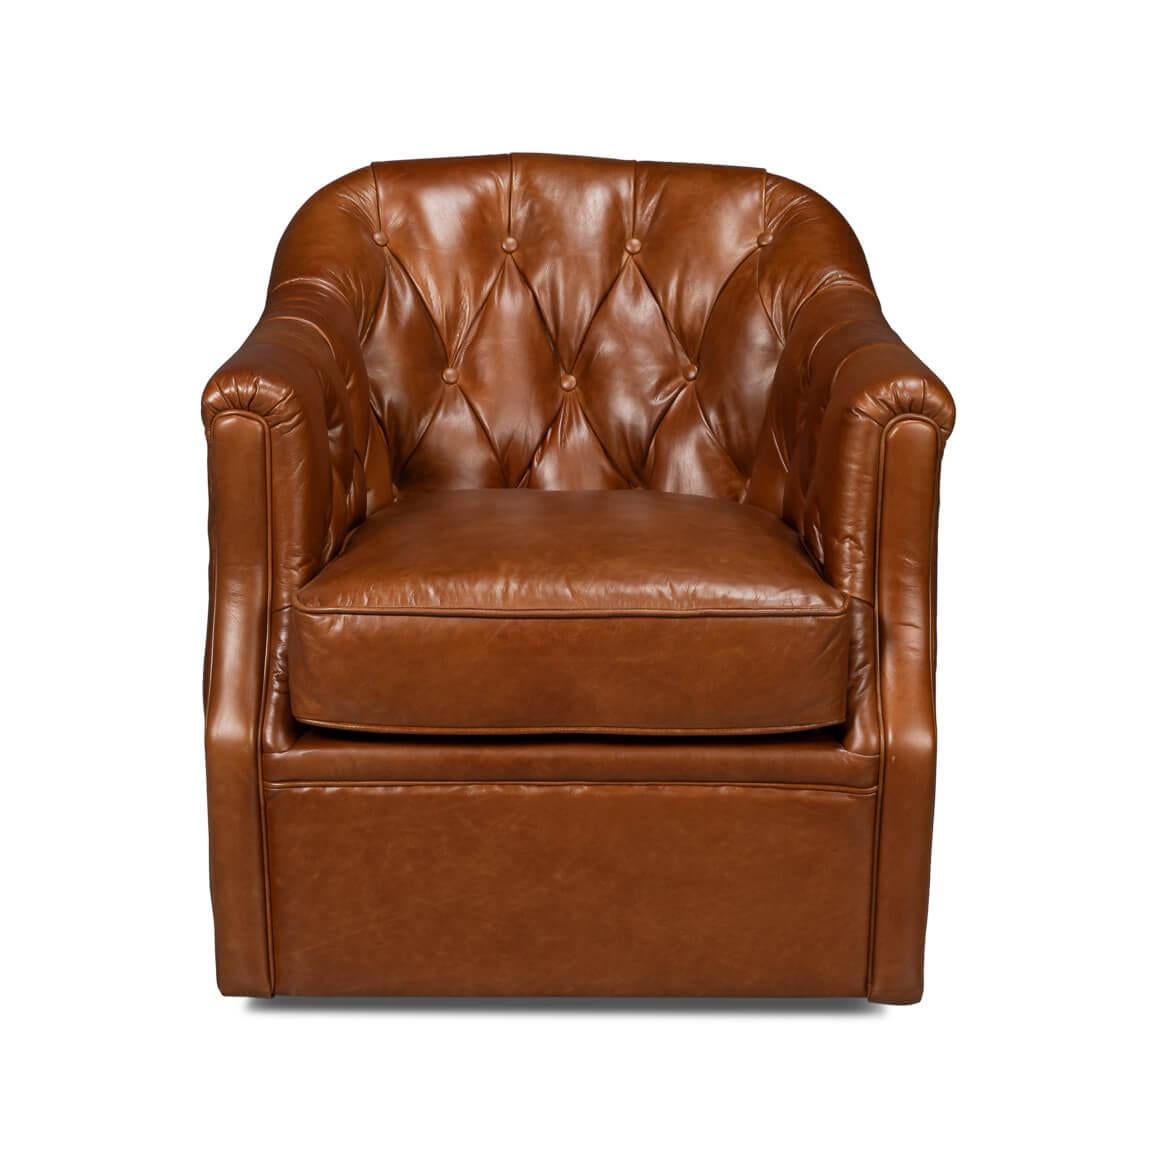 A classic leather upholstered tub back armchair. In our Havana Brown leather with button tufted backrest and a cushioned seat, raised on a swivel base.
Dimensions: 30